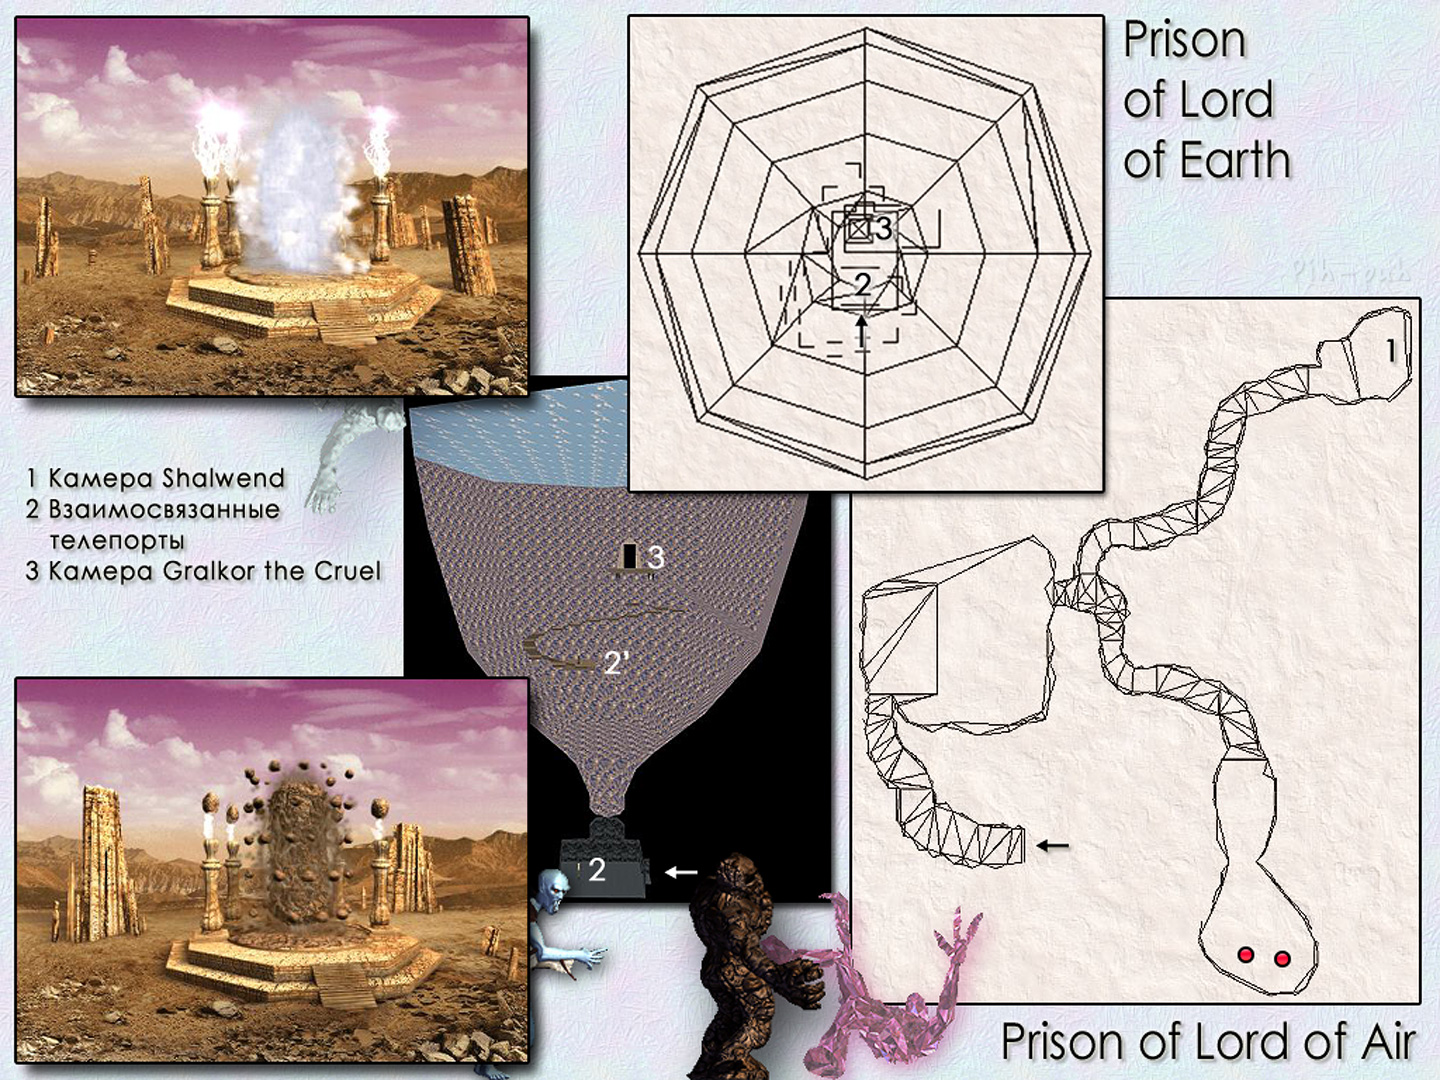 MIGHT AND MAGIC VIII. .  Prison of Lord of Air  Prison of Lord of Earth.